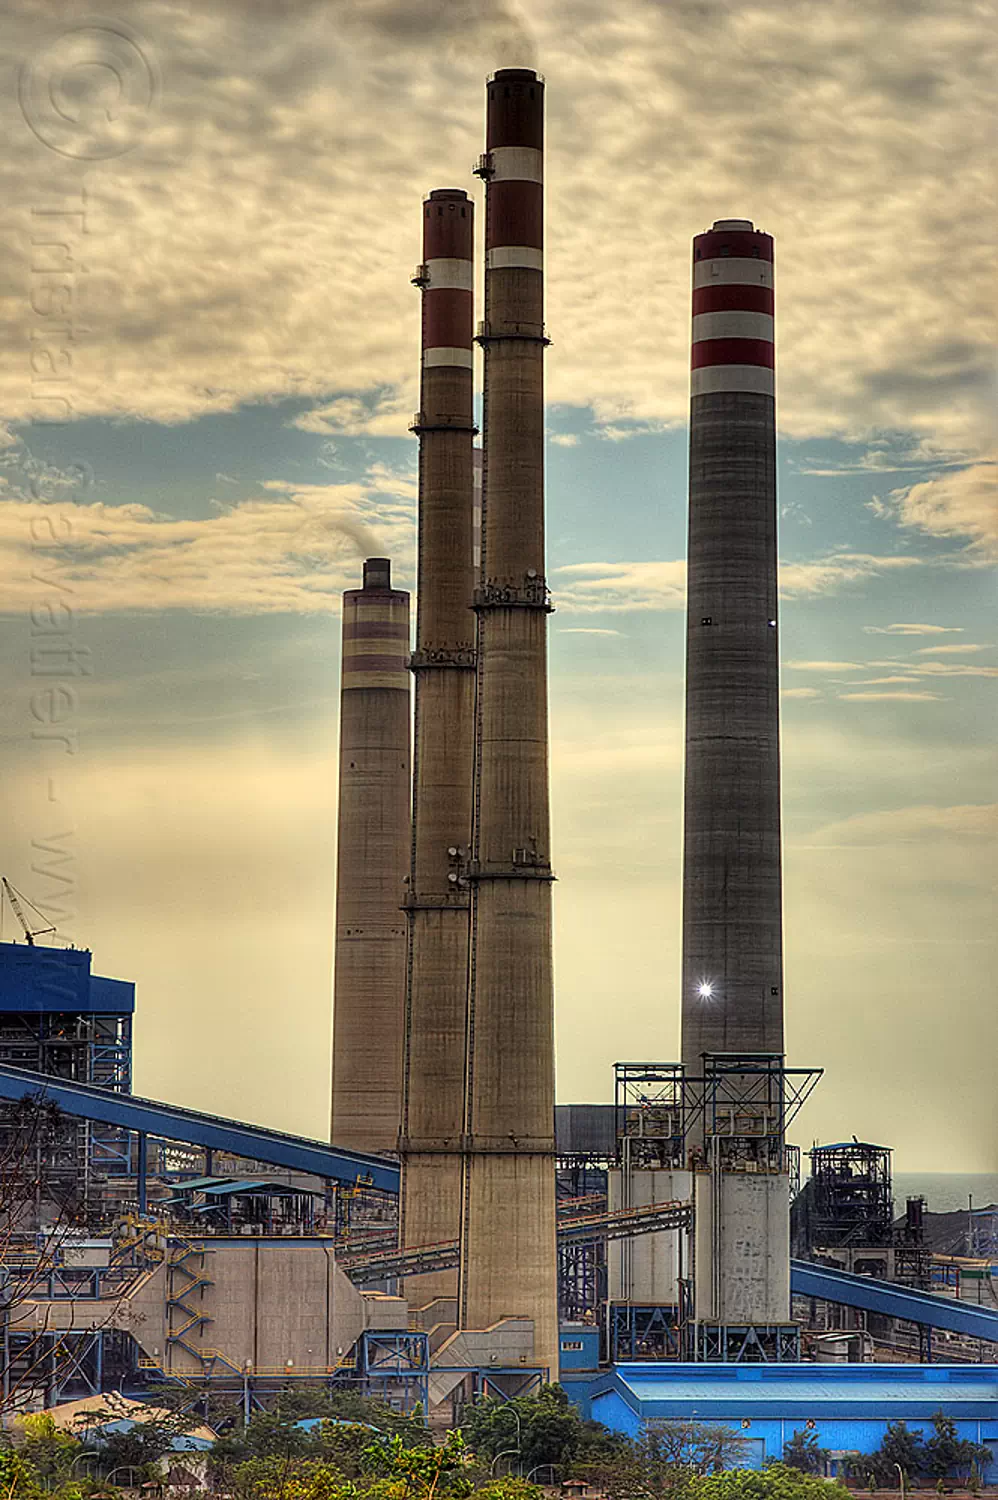 smoke stacks from coal-burning power plant, coal fired, electricity, energy, environment, factory, indonesia, paiton complex, pollution, power generation, power station, smoke stacks